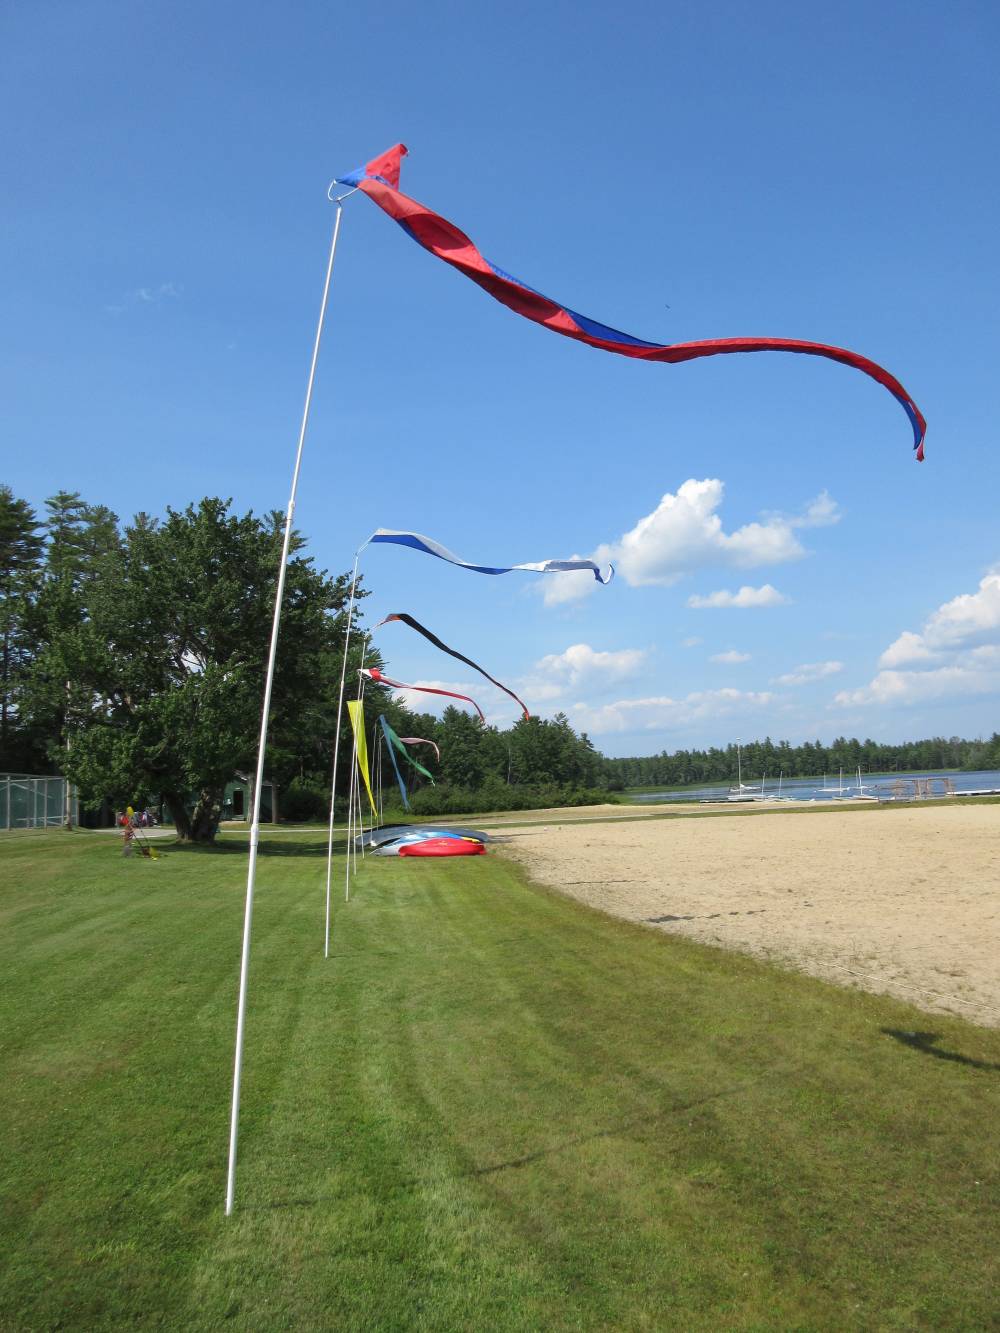 TOP MAINE VOLLEYBALL CAMP: Tripp Lake Camp is a Top Volleyball Summer Camp located in Poland Maine offering many fun and enriching Volleyball and other camp programs. 